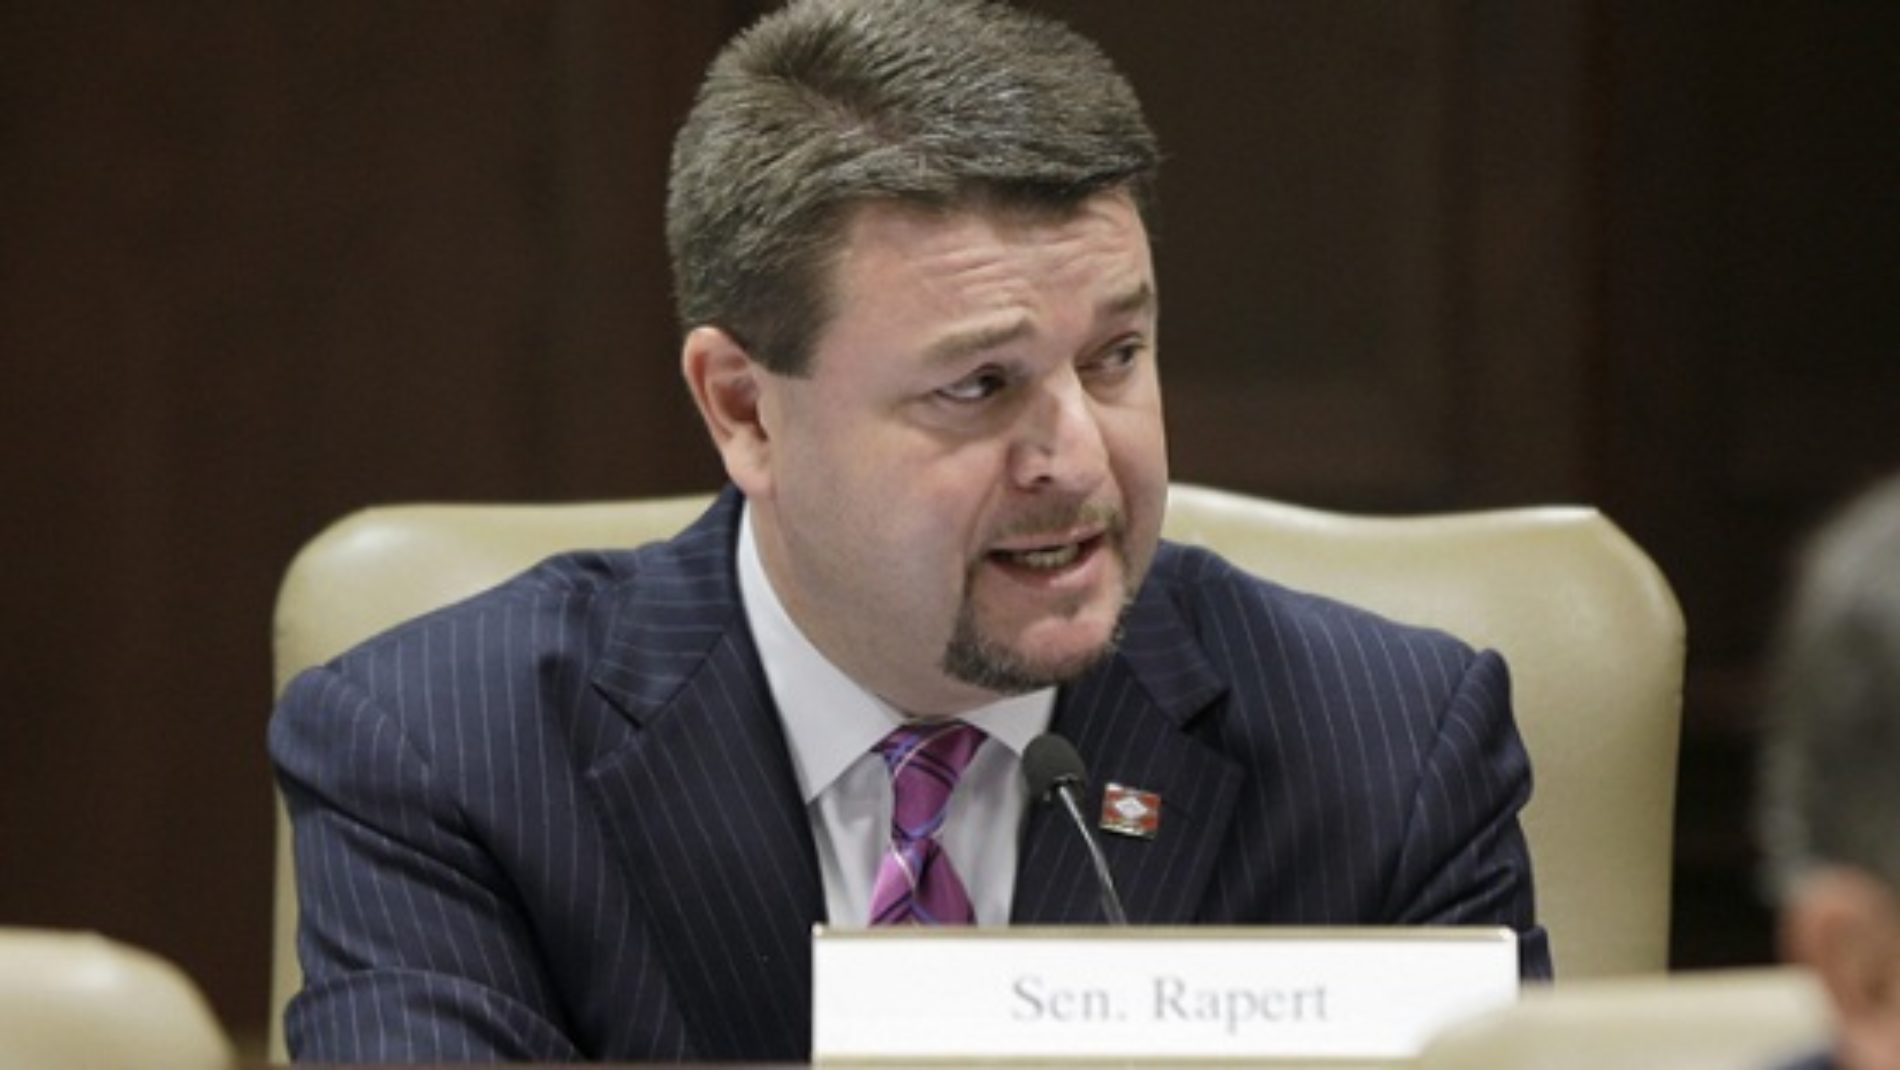 Arkansas Lawmaker Outraged Over Gay Pride Being Held On A Sunday